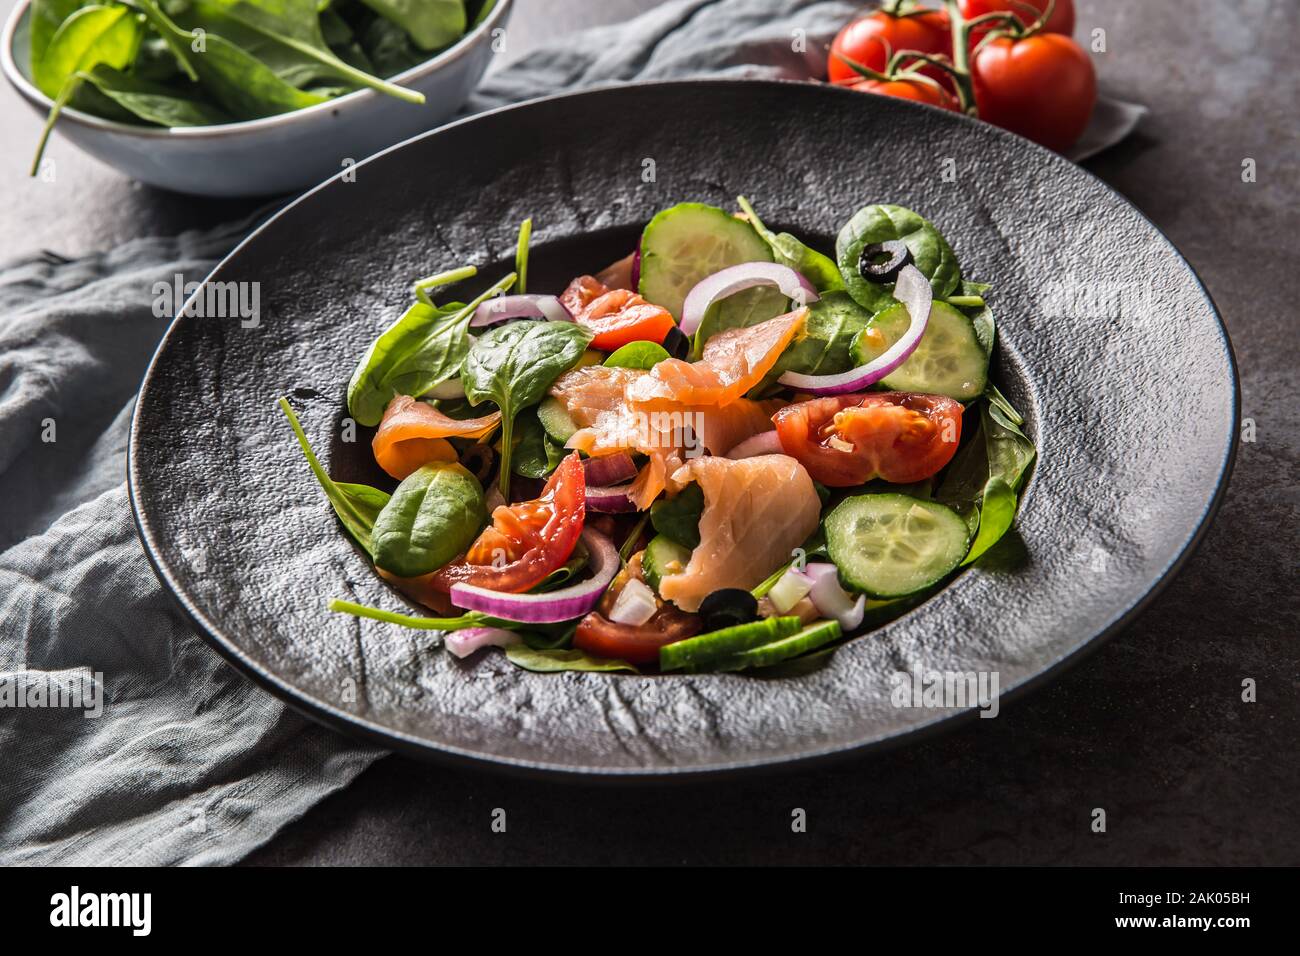 Salmon salad with vegetable in plate on dark kitchen table Stock Photo